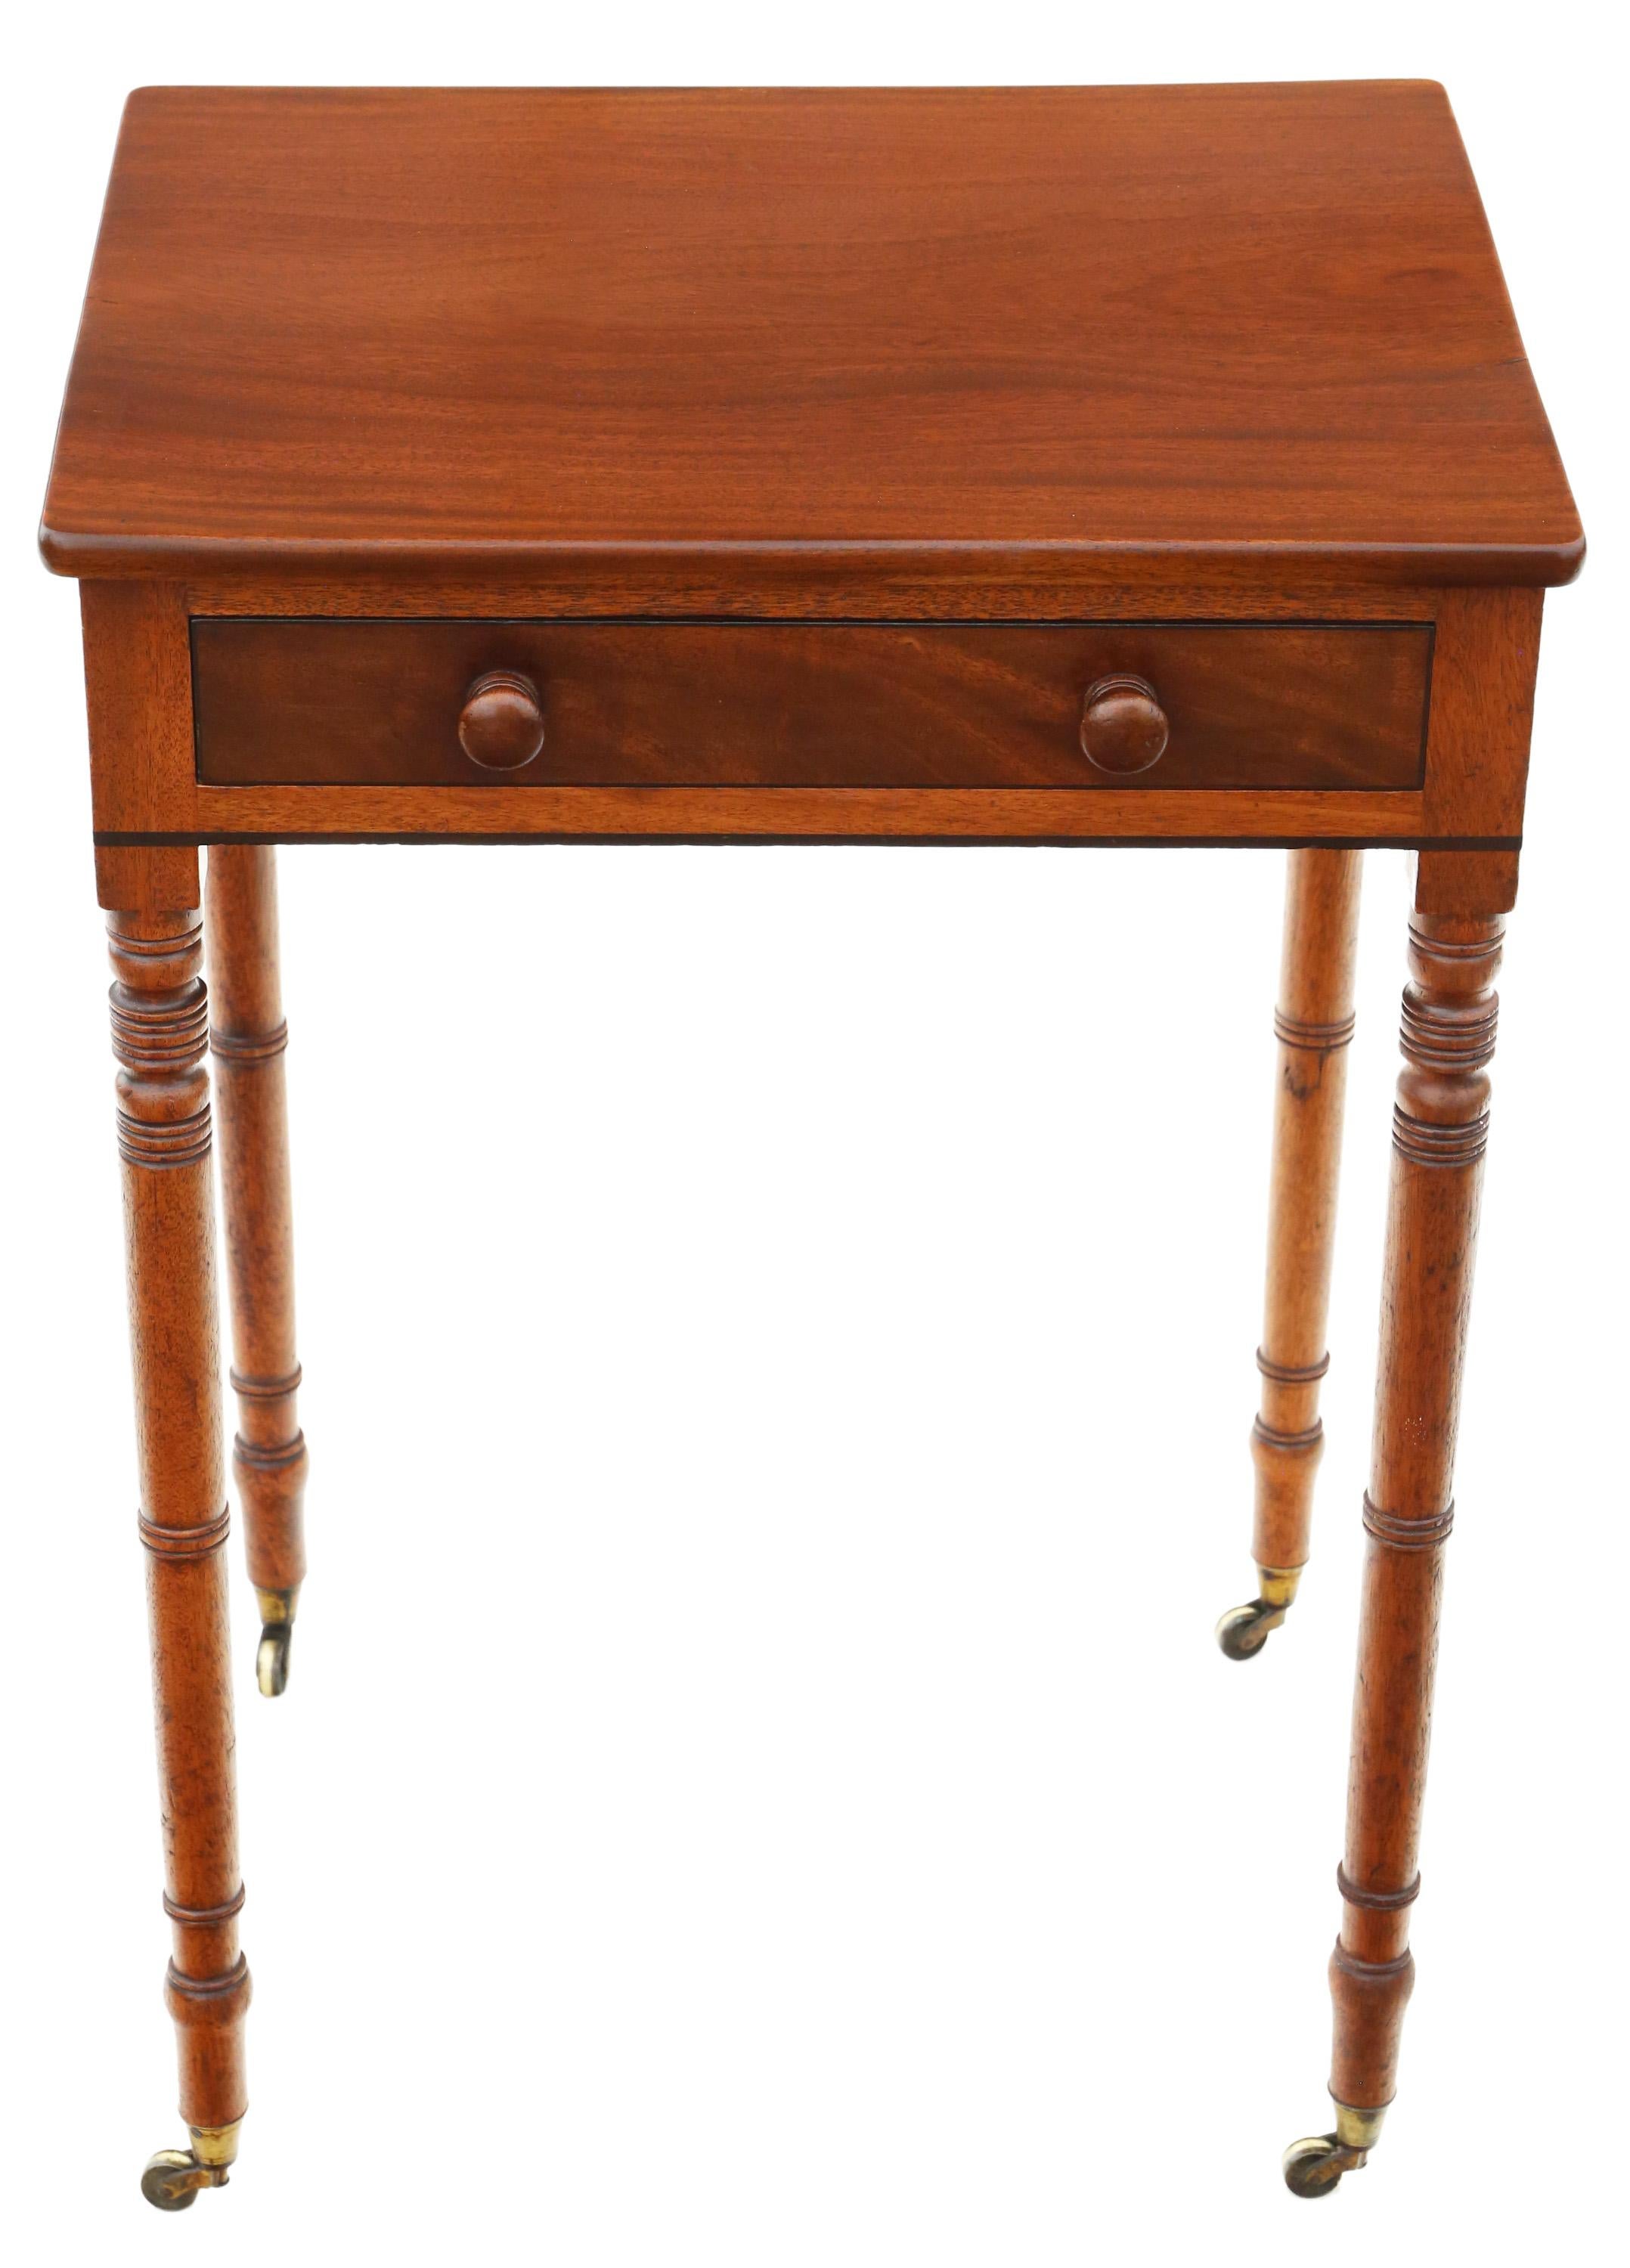 Antique very fine quality small 19th Century mahogany writing side table desk. Lovely age colour and patina. Recently restored to a very good standard.

No loose joints and no woodworm. Full of age, character and charm. There is a drawer to the